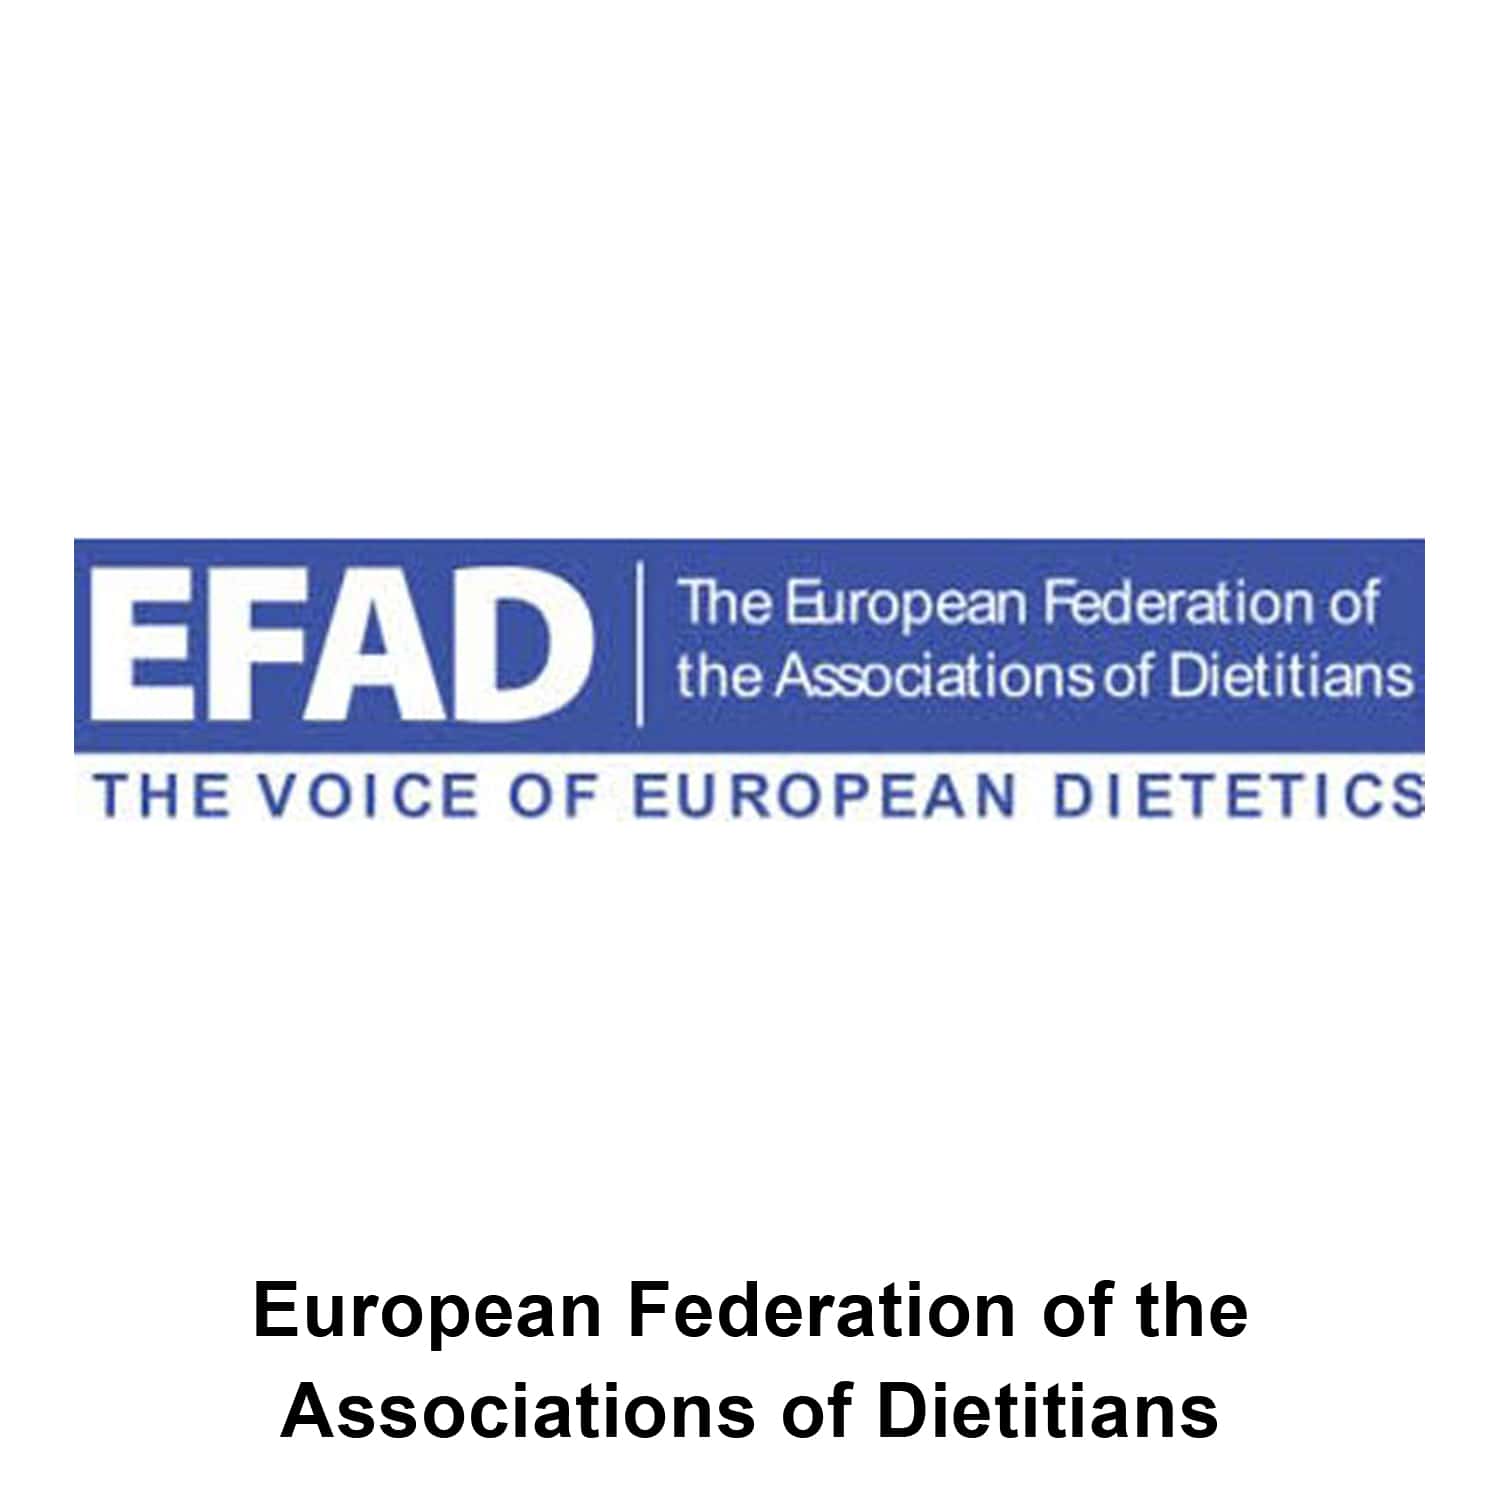 European Federation of the Associations of Dietitians - EFAD